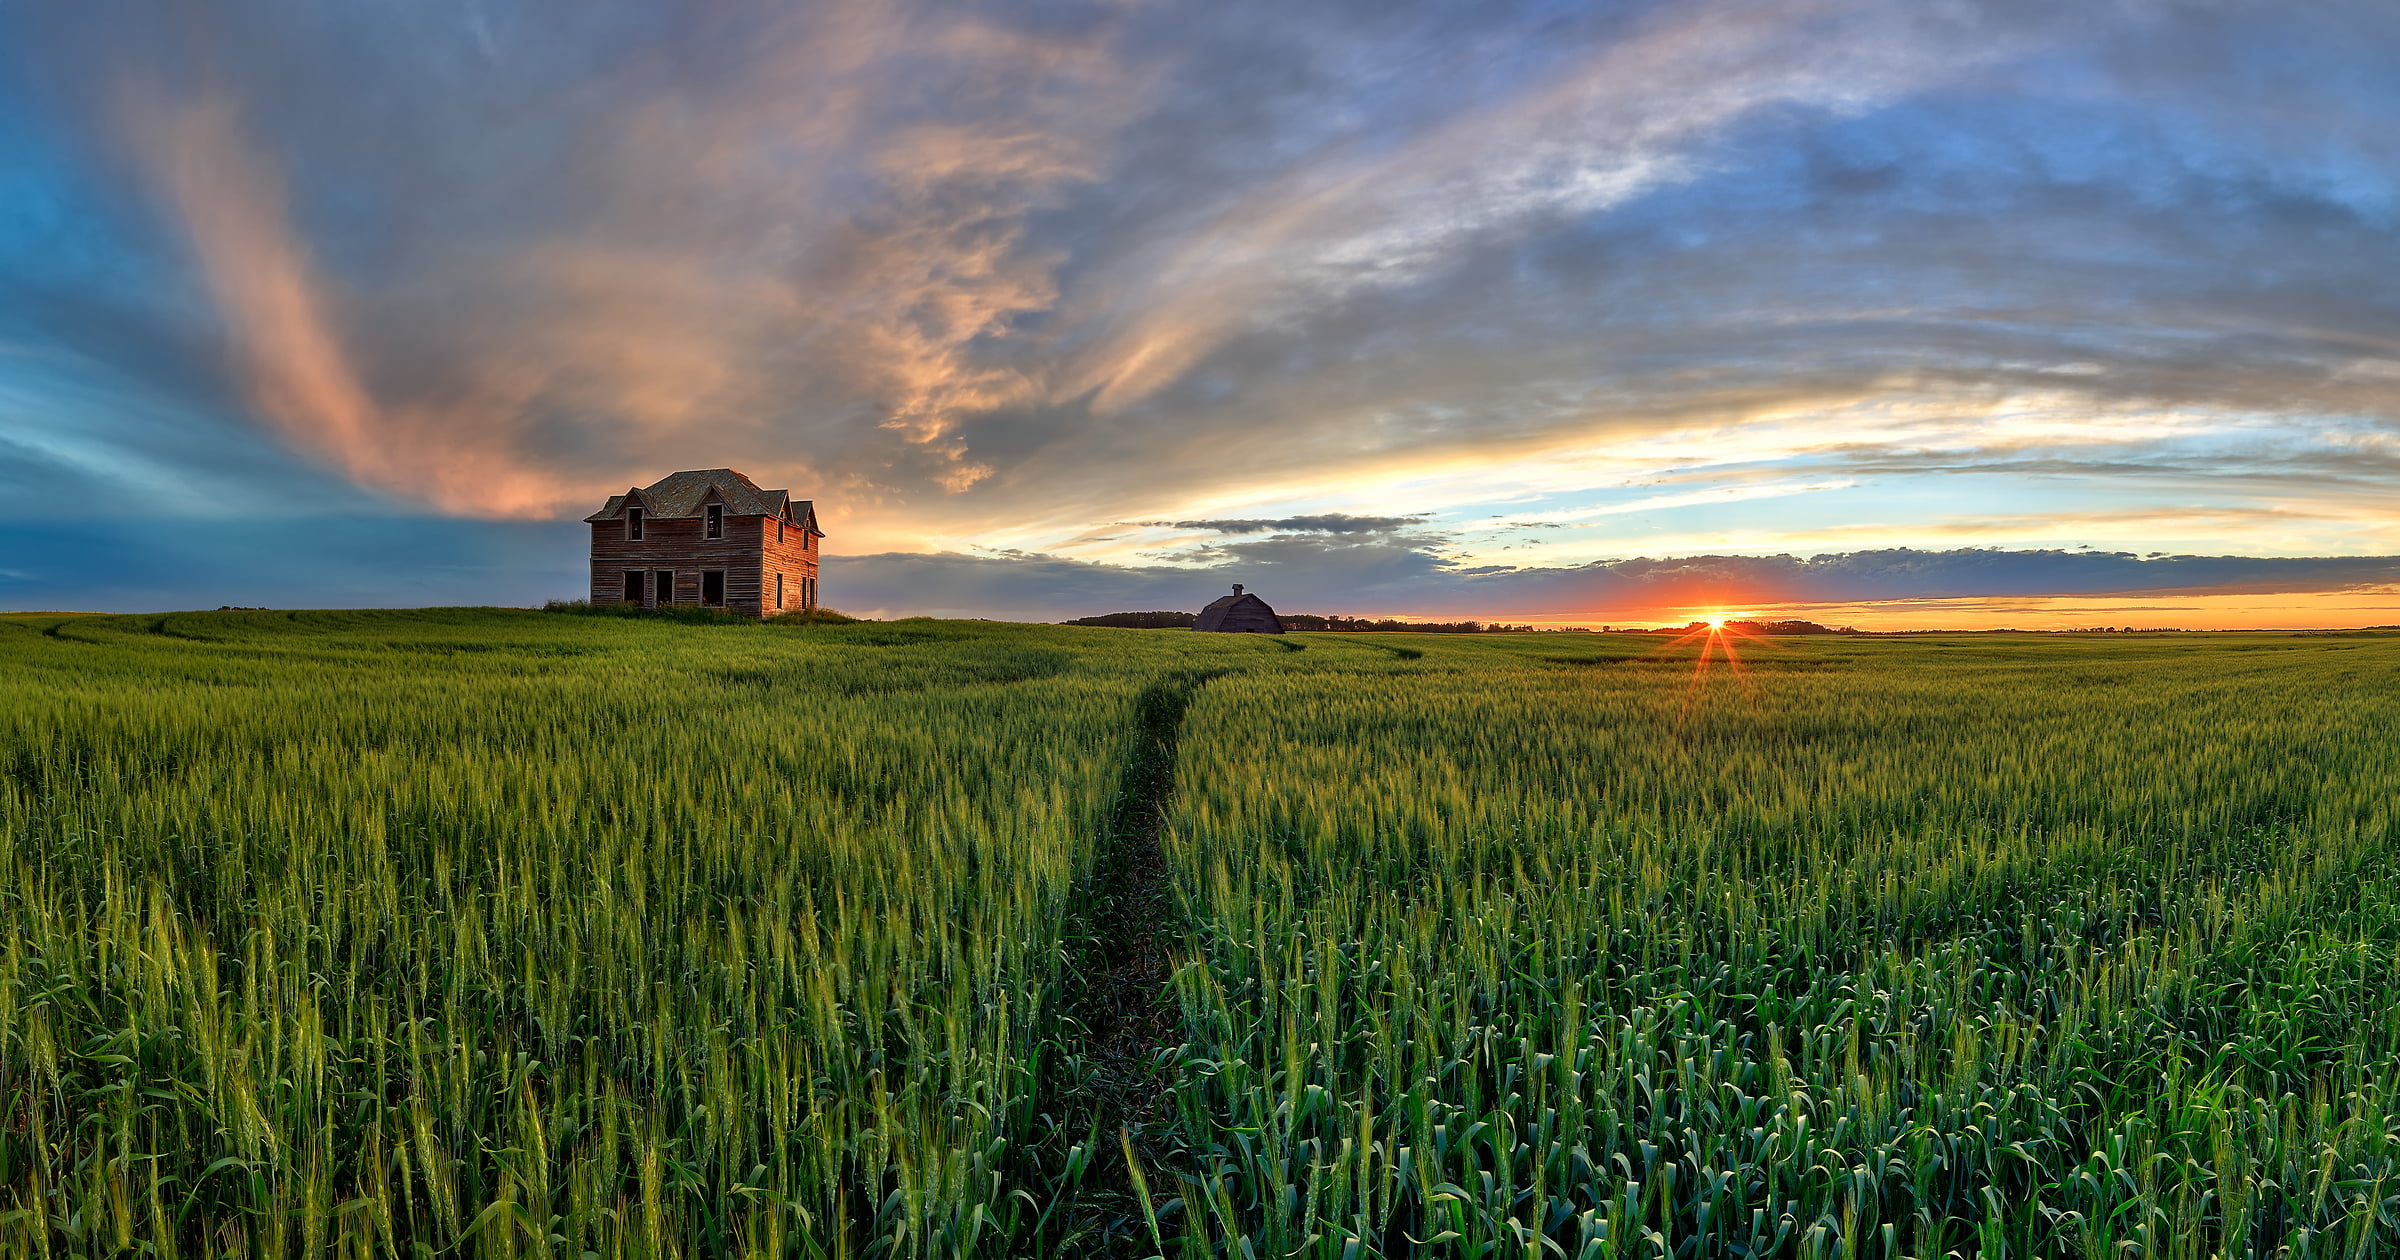 89 megapixels! A very high resolution, large-format VAST photo of farmland, grasslands, the prairie, and an old abandoned house; fine art landscape photo created at sunset by Scott Dimond on the Great Plains in Alberta, Canada.